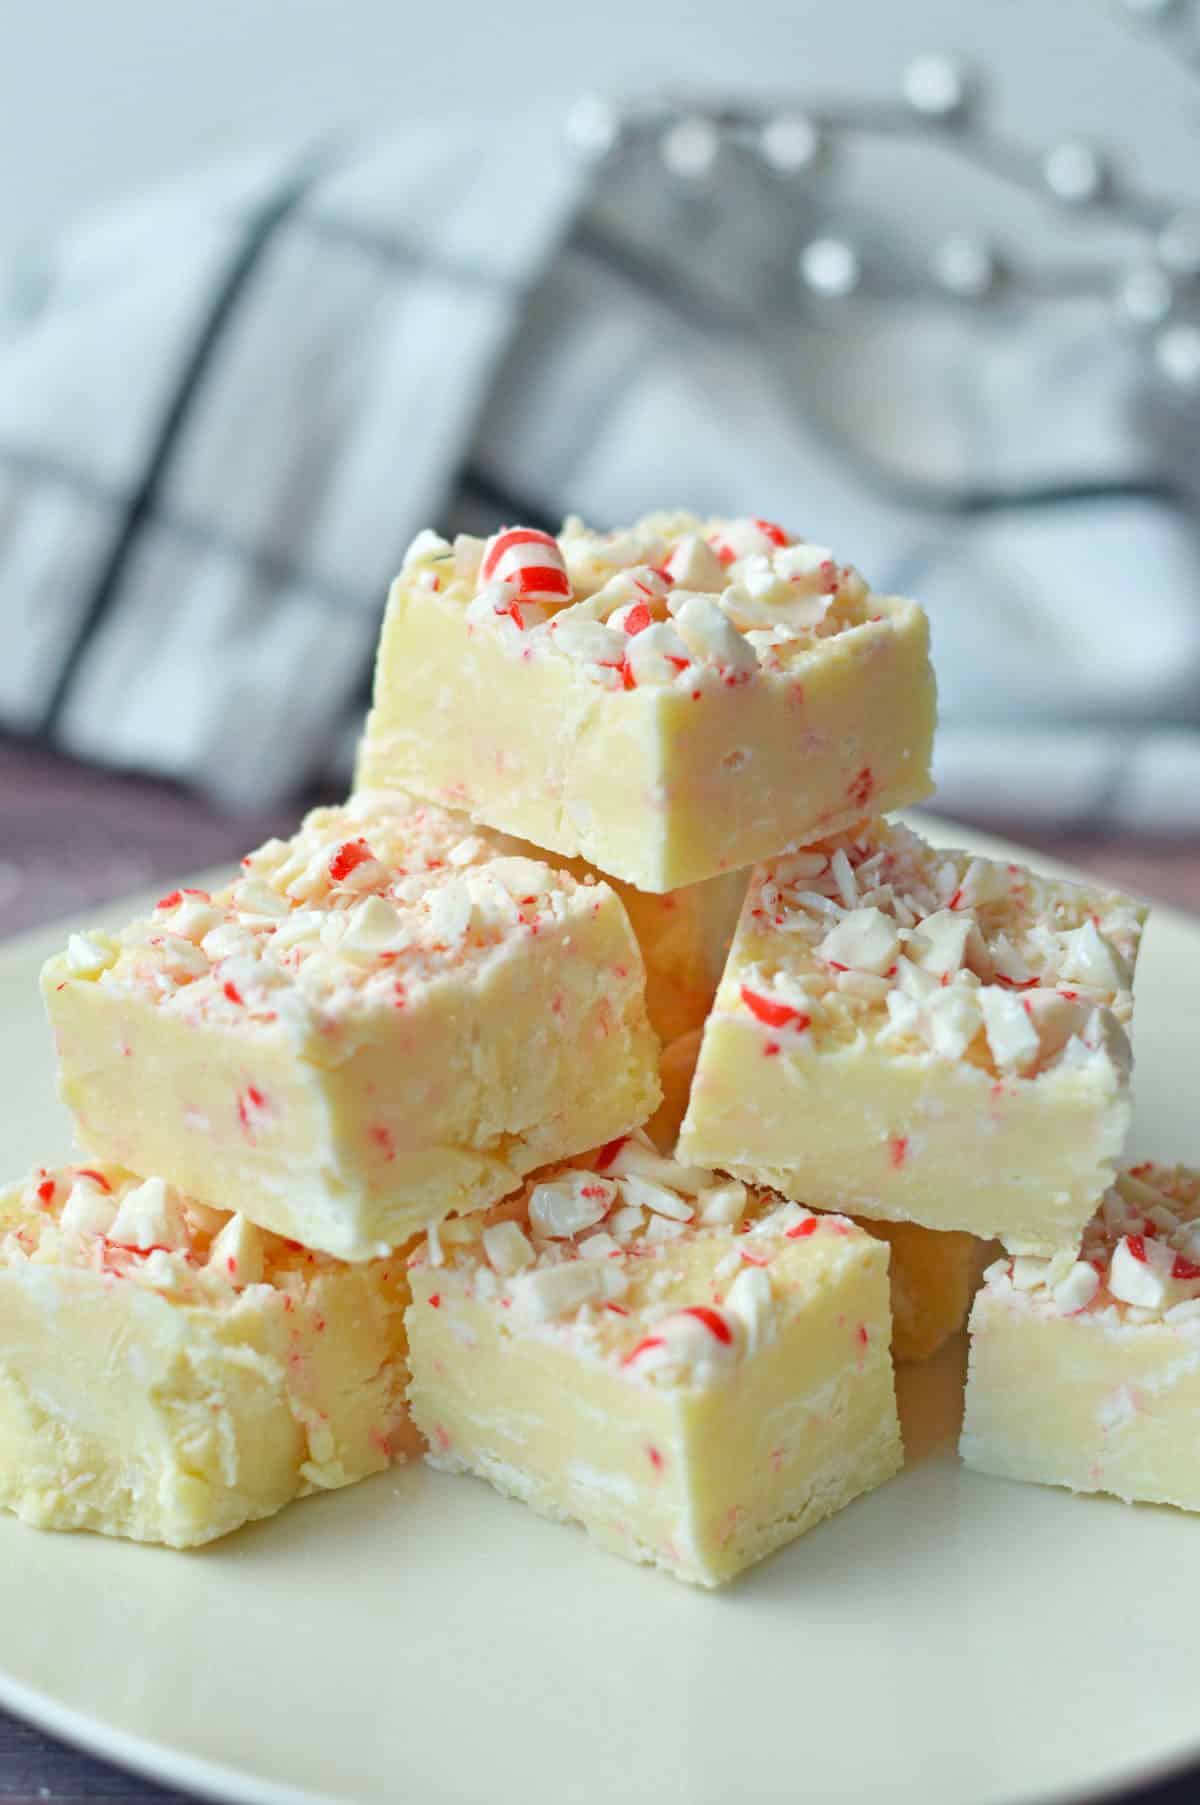 White chocolate fudge with peppermint candy pieces.